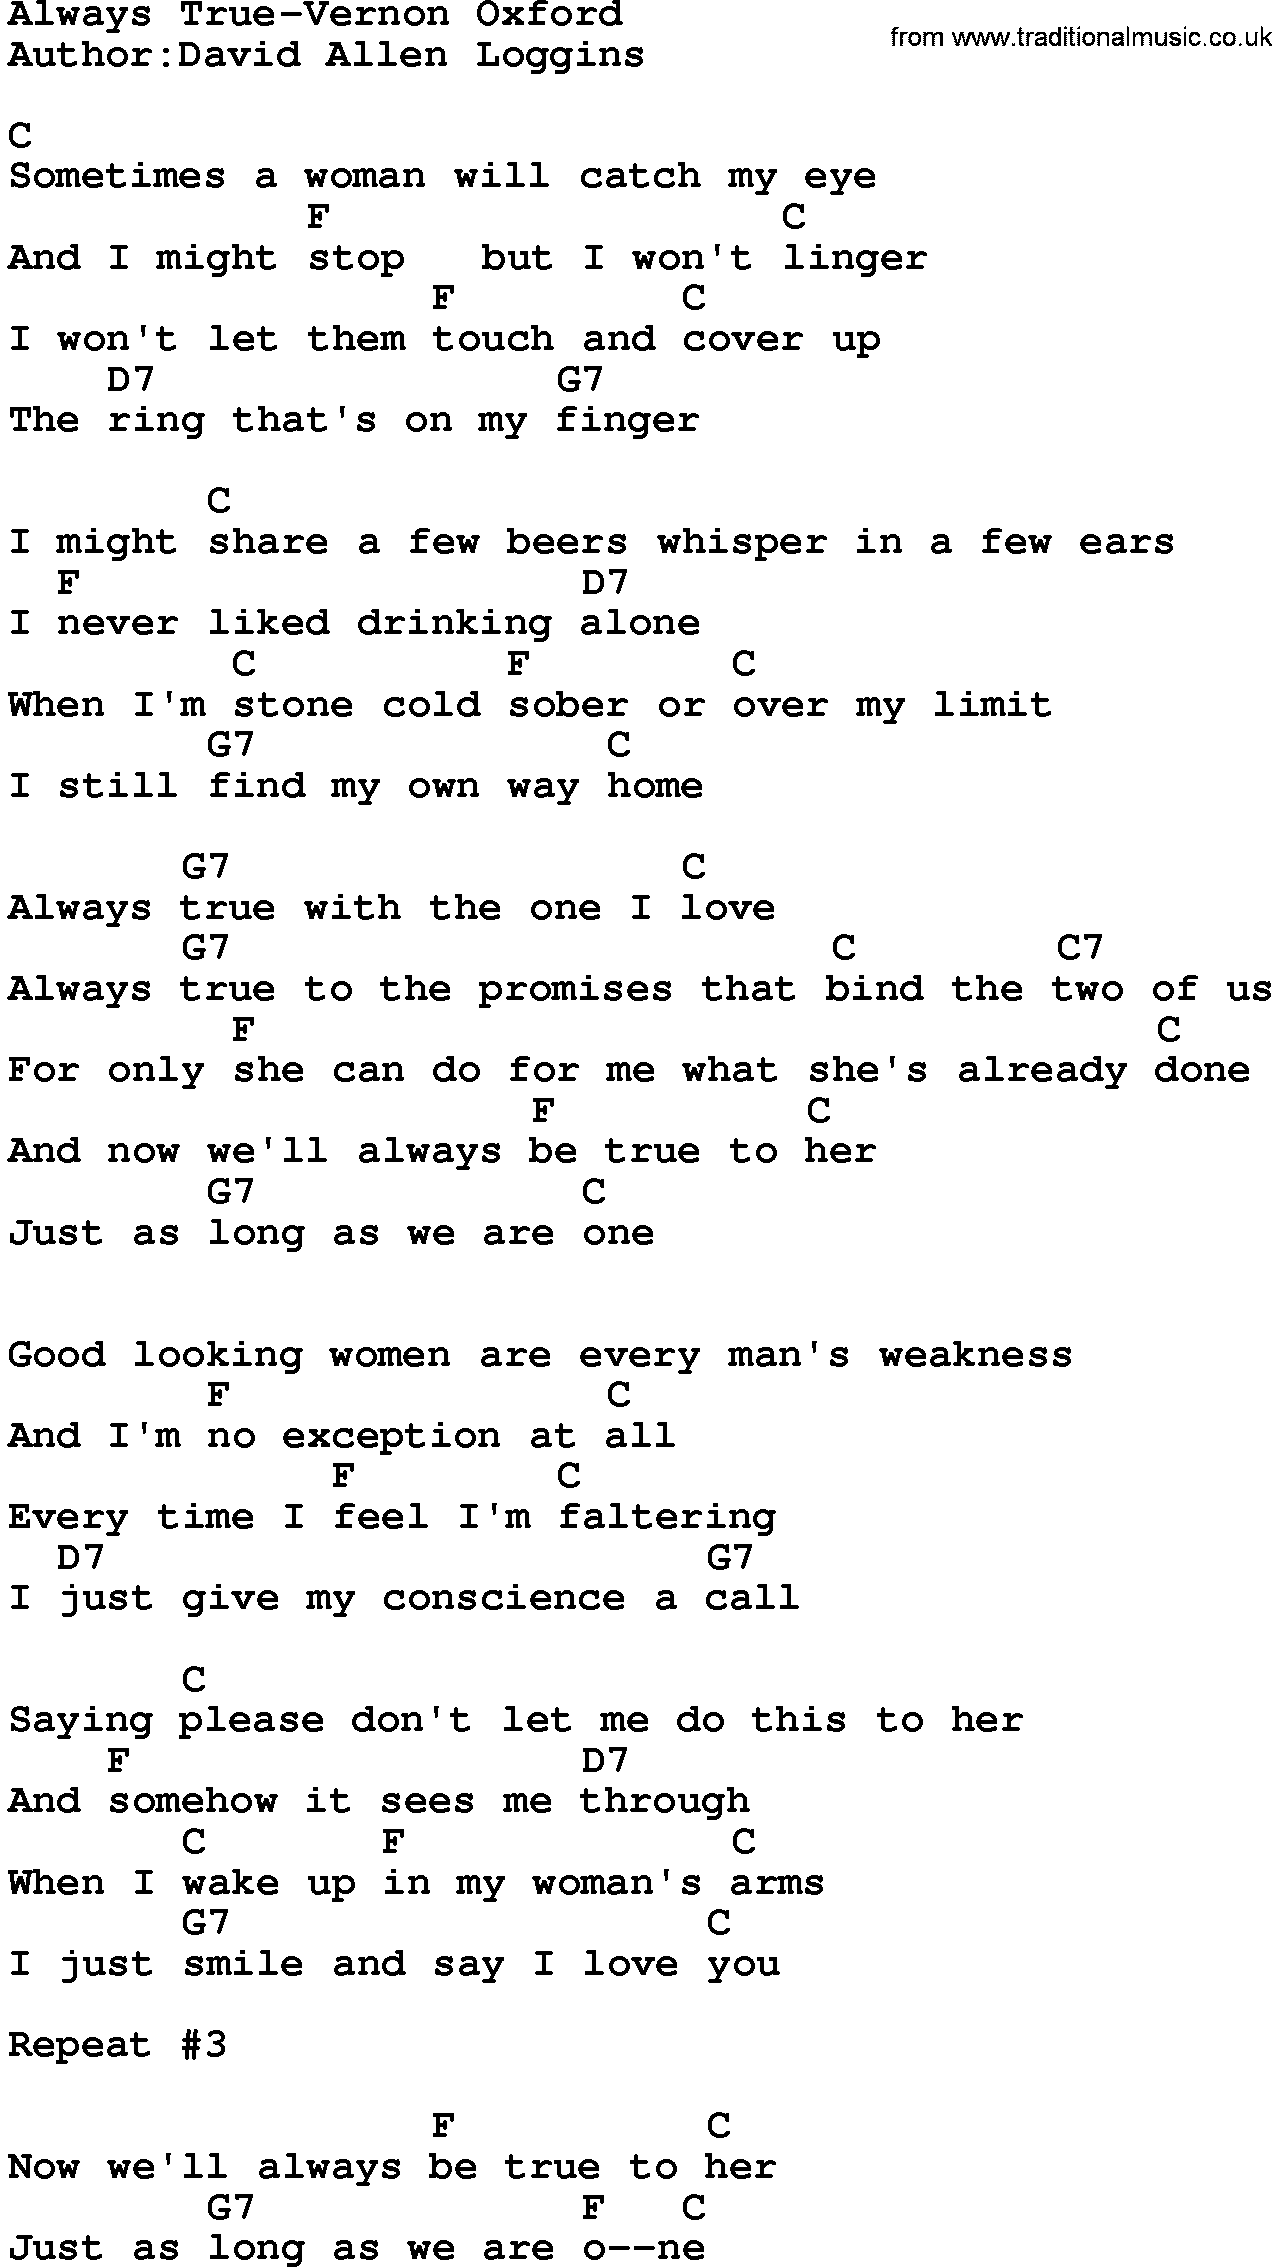 Country music song: Always True-Vernon Oxford lyrics and chords